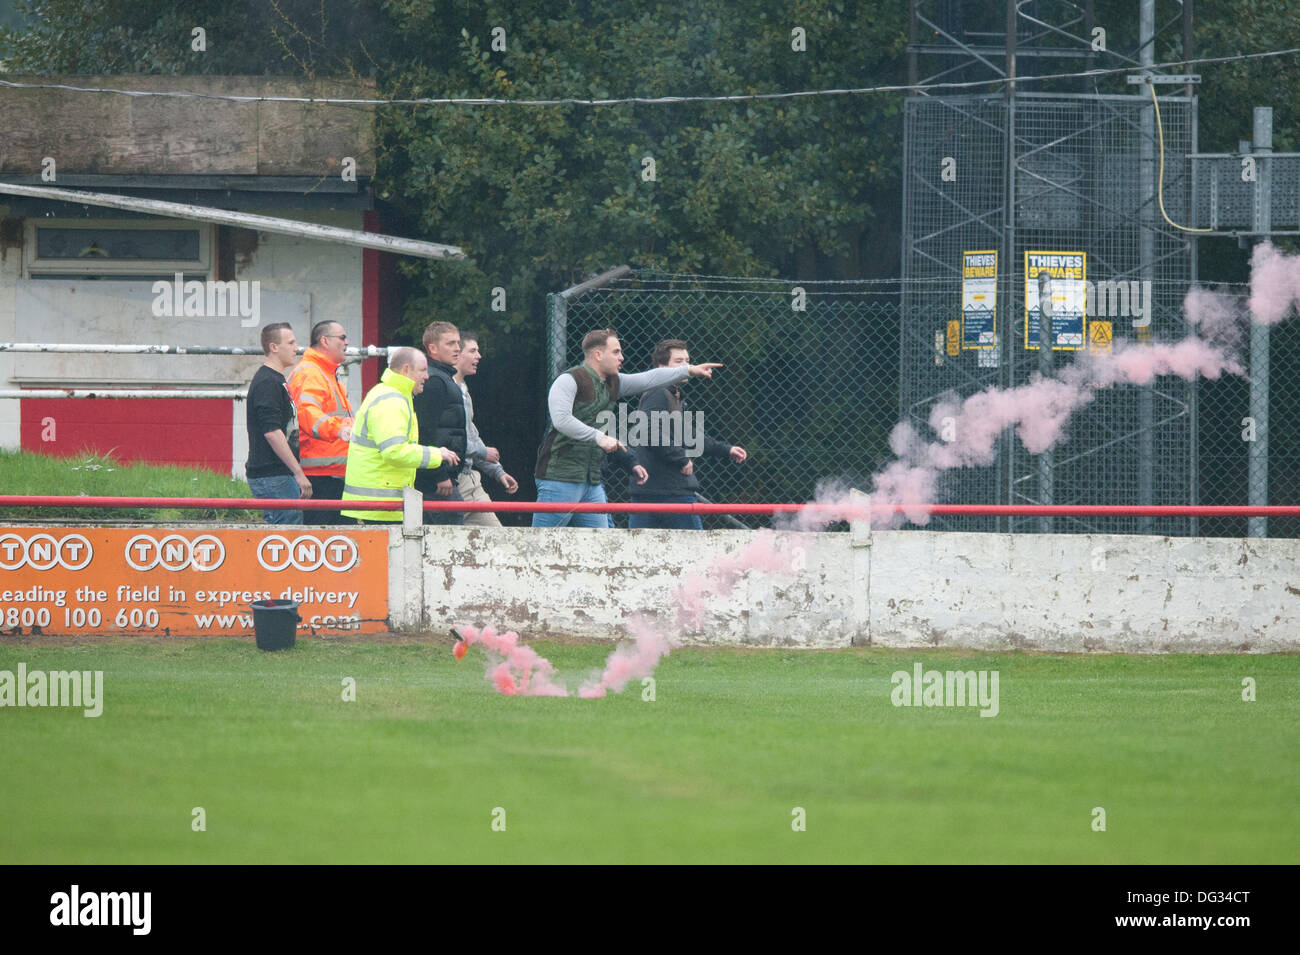 Atherstone, Warwickshire, UK. 12th October, 2013. A group of fans from the home end of the Sheepy Road ground walk around the perimeter of the pitch and scale the fences to attack the visiting supporters (Barrow AFC). A firework was also thrown towards to the terrace of the away following. A flag was stolen from the Barrow AFC fans and then set on fire using a lit firework. Atherstone chairman Rob Weale apologised for what occurred and vowed to pursue the perpetrators. Stock Photo